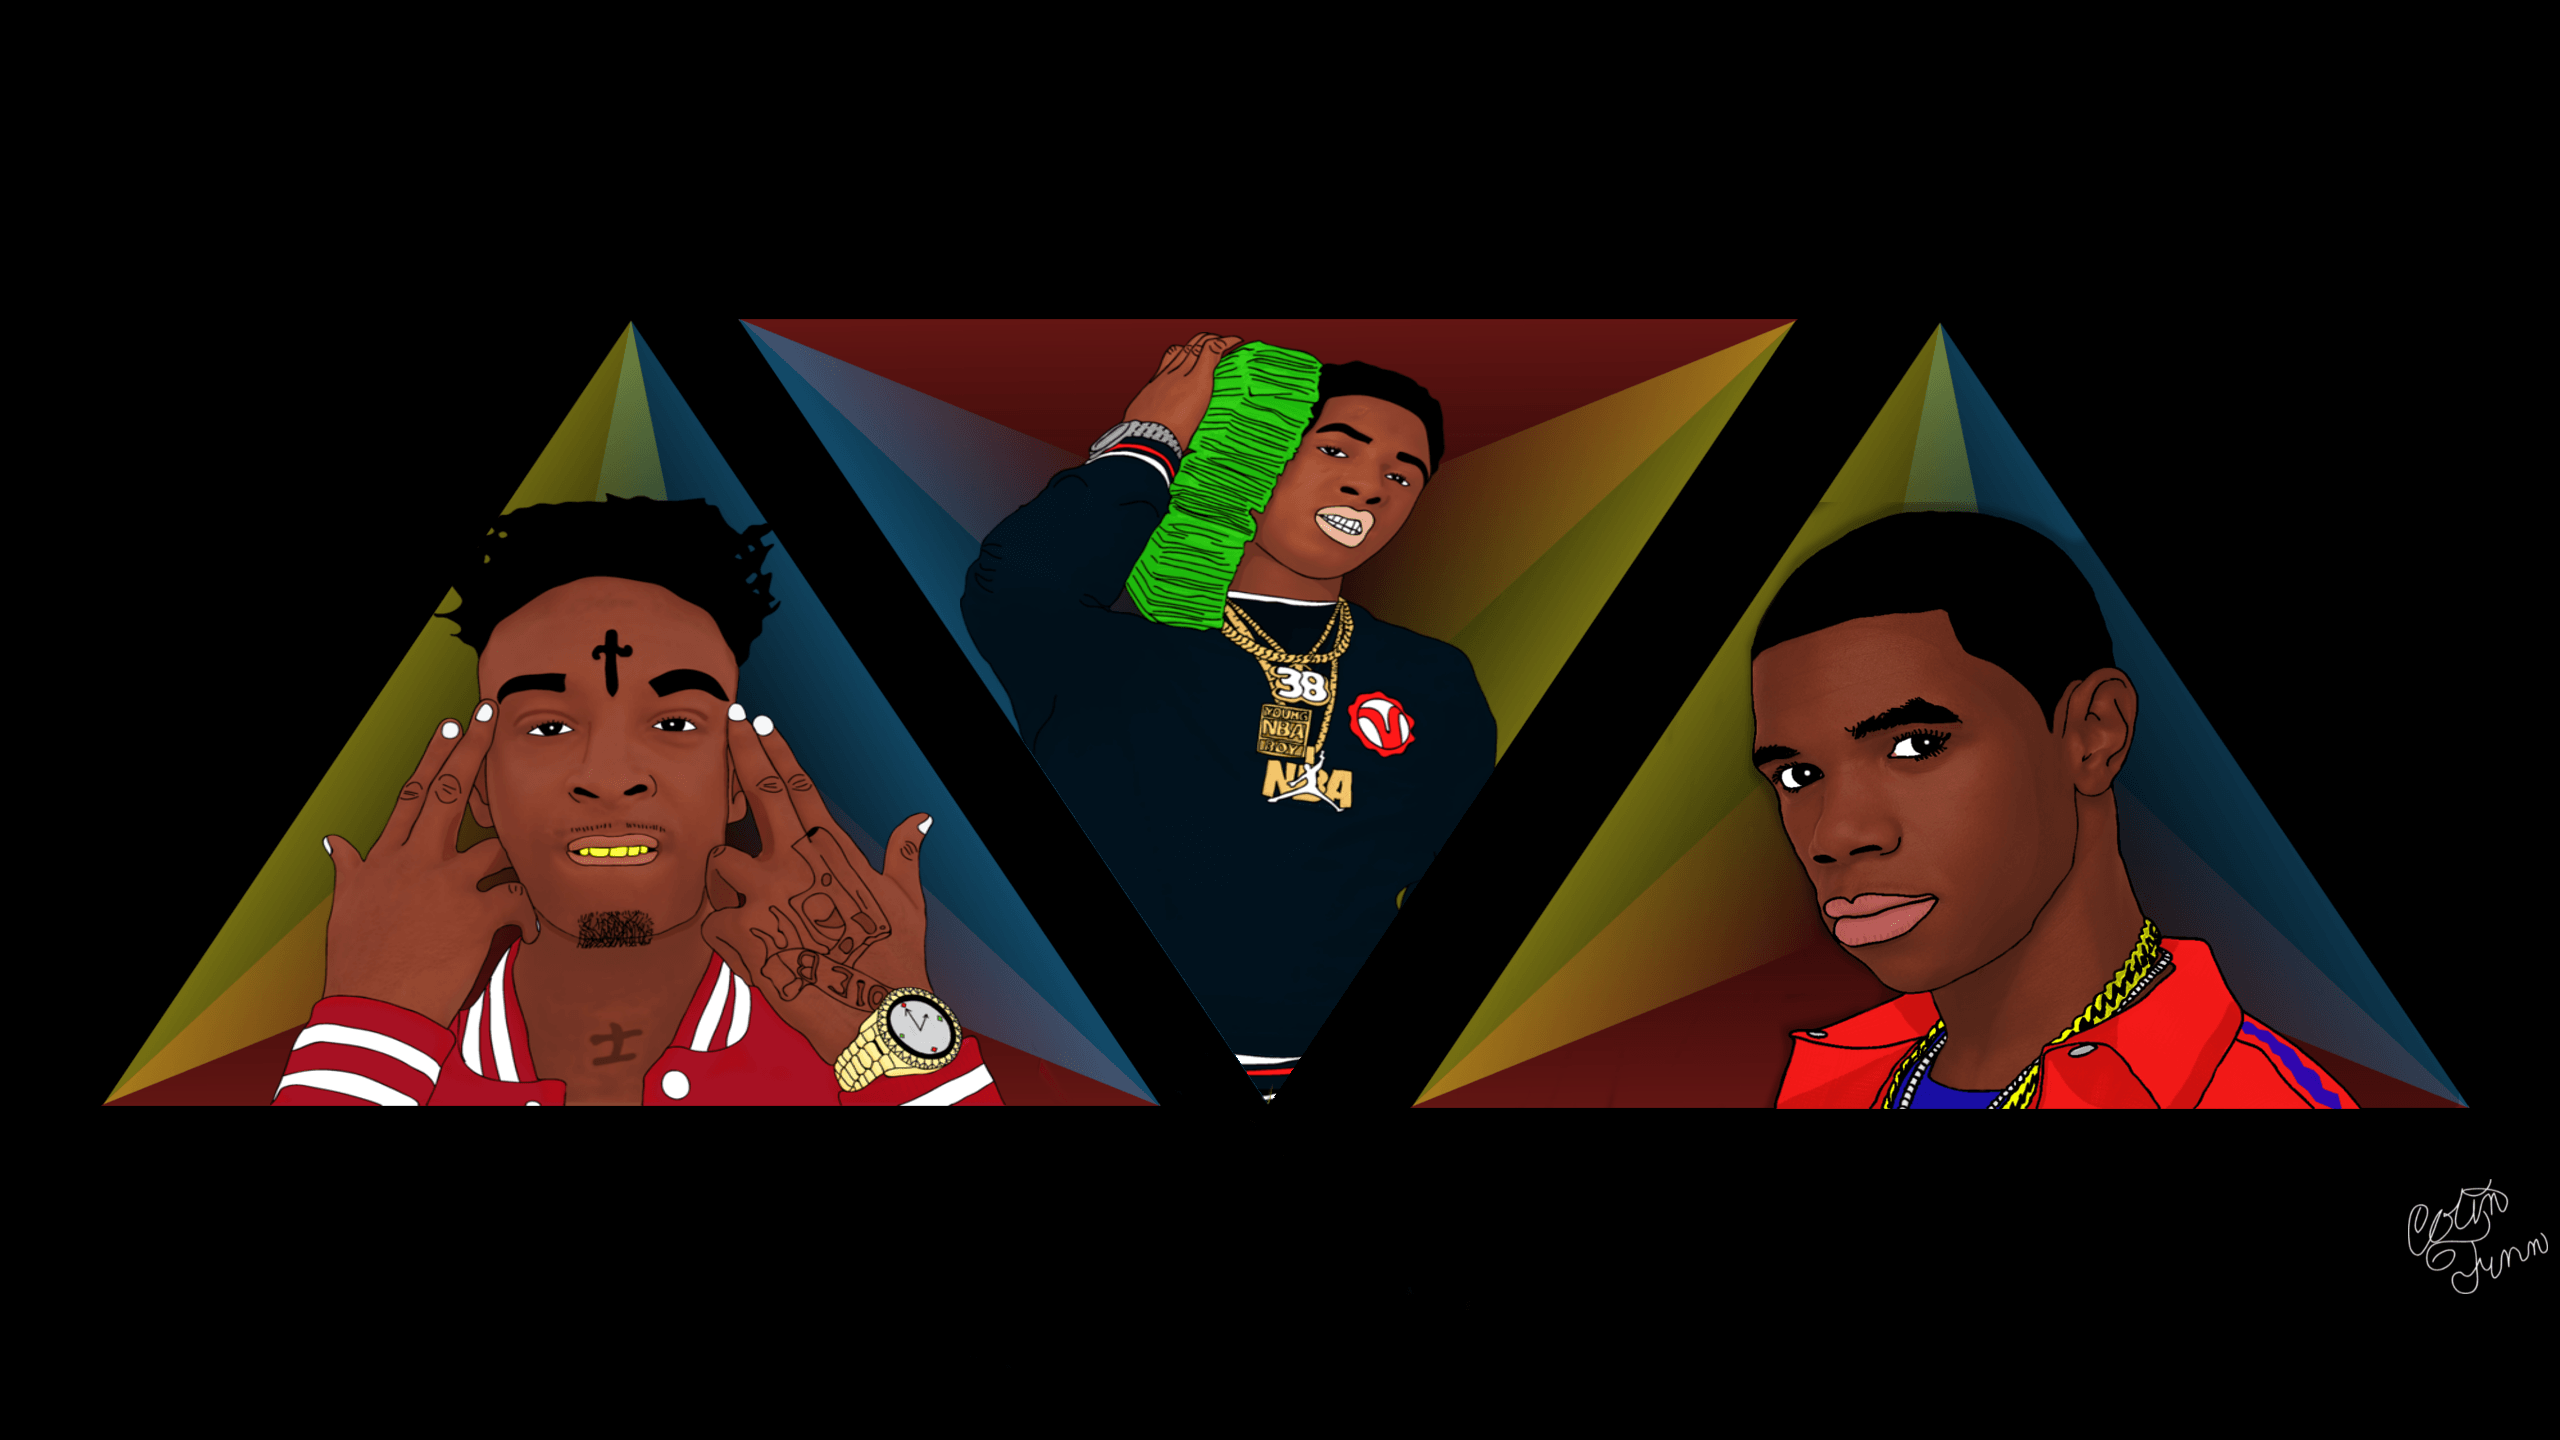 21 Savage NBA Logo - 21 Savage, NBA YoungBoy and A Boogie Fan Art : HipHopImages